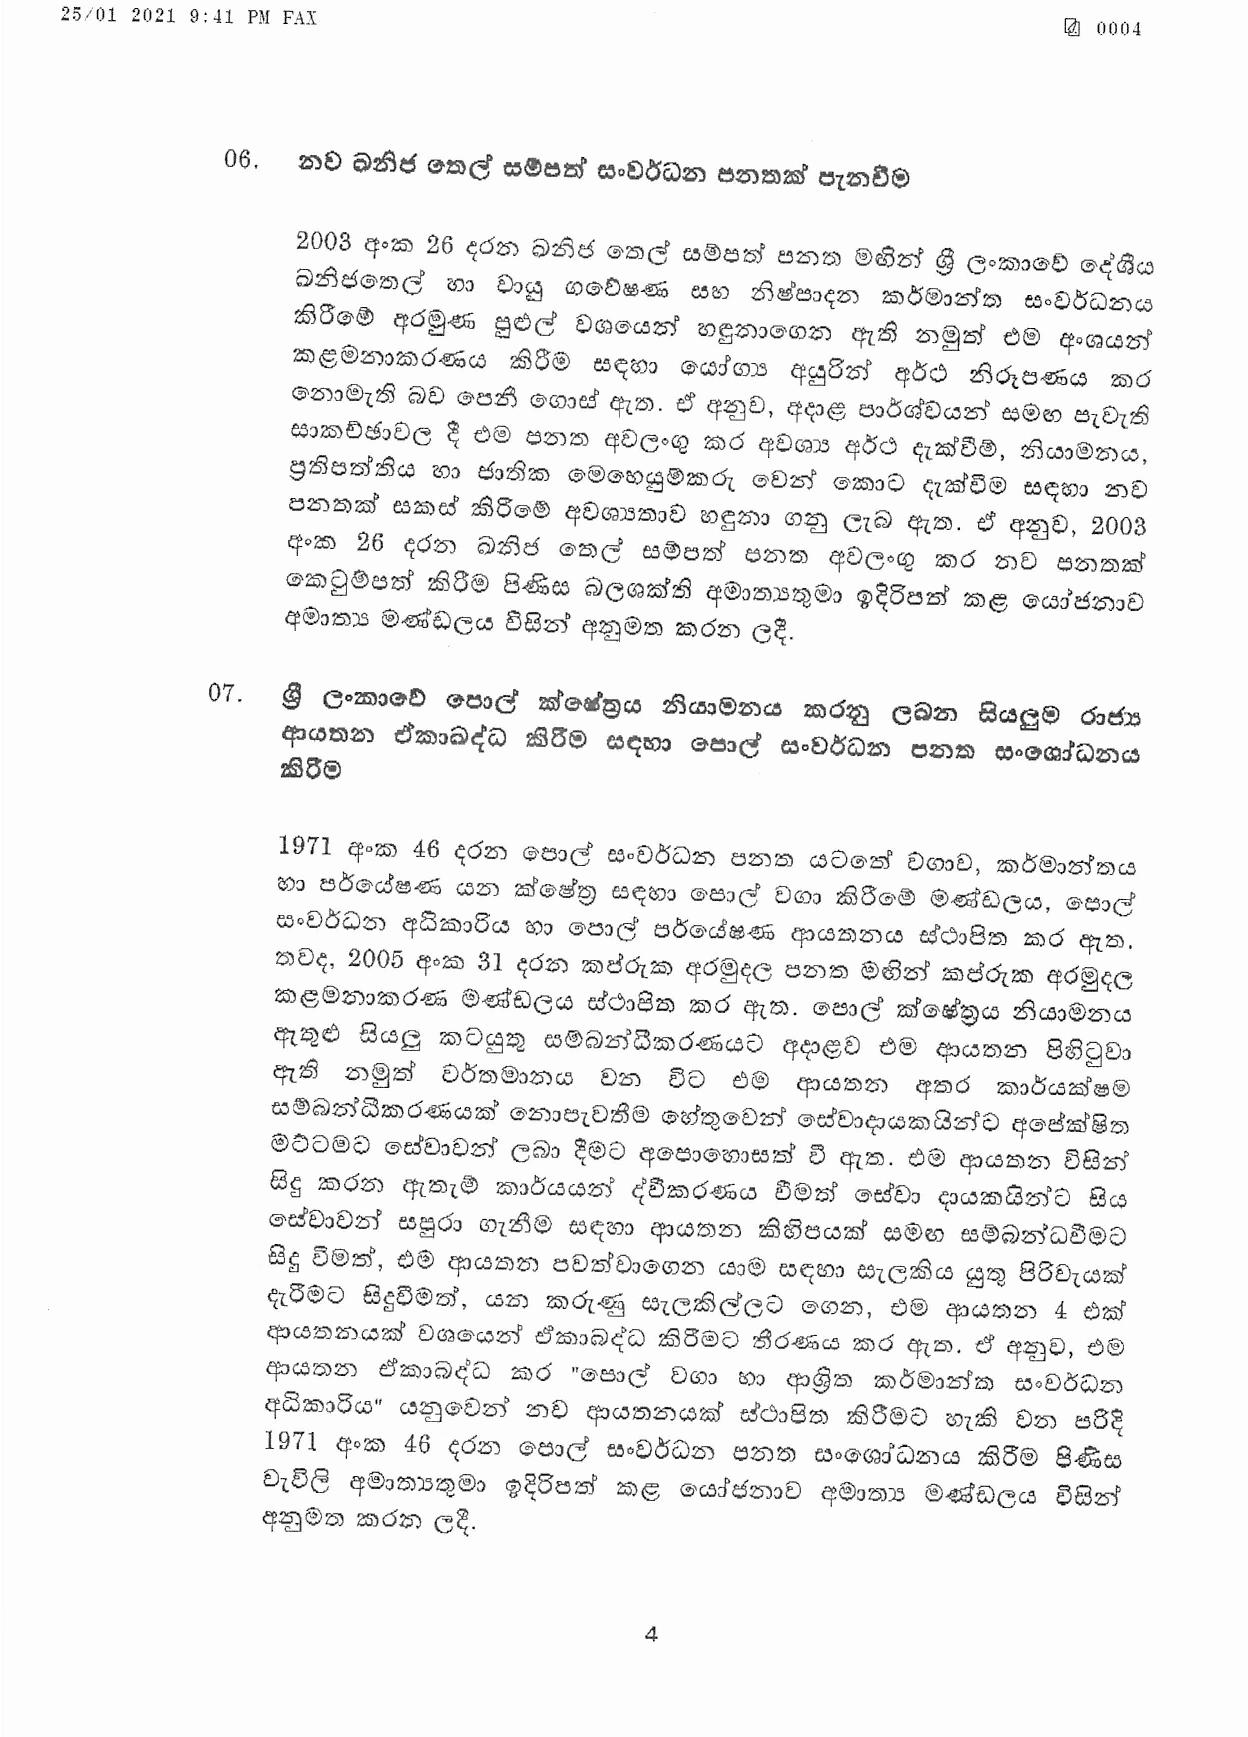 Cabinet Decision on 25.01.2021 1 page 004